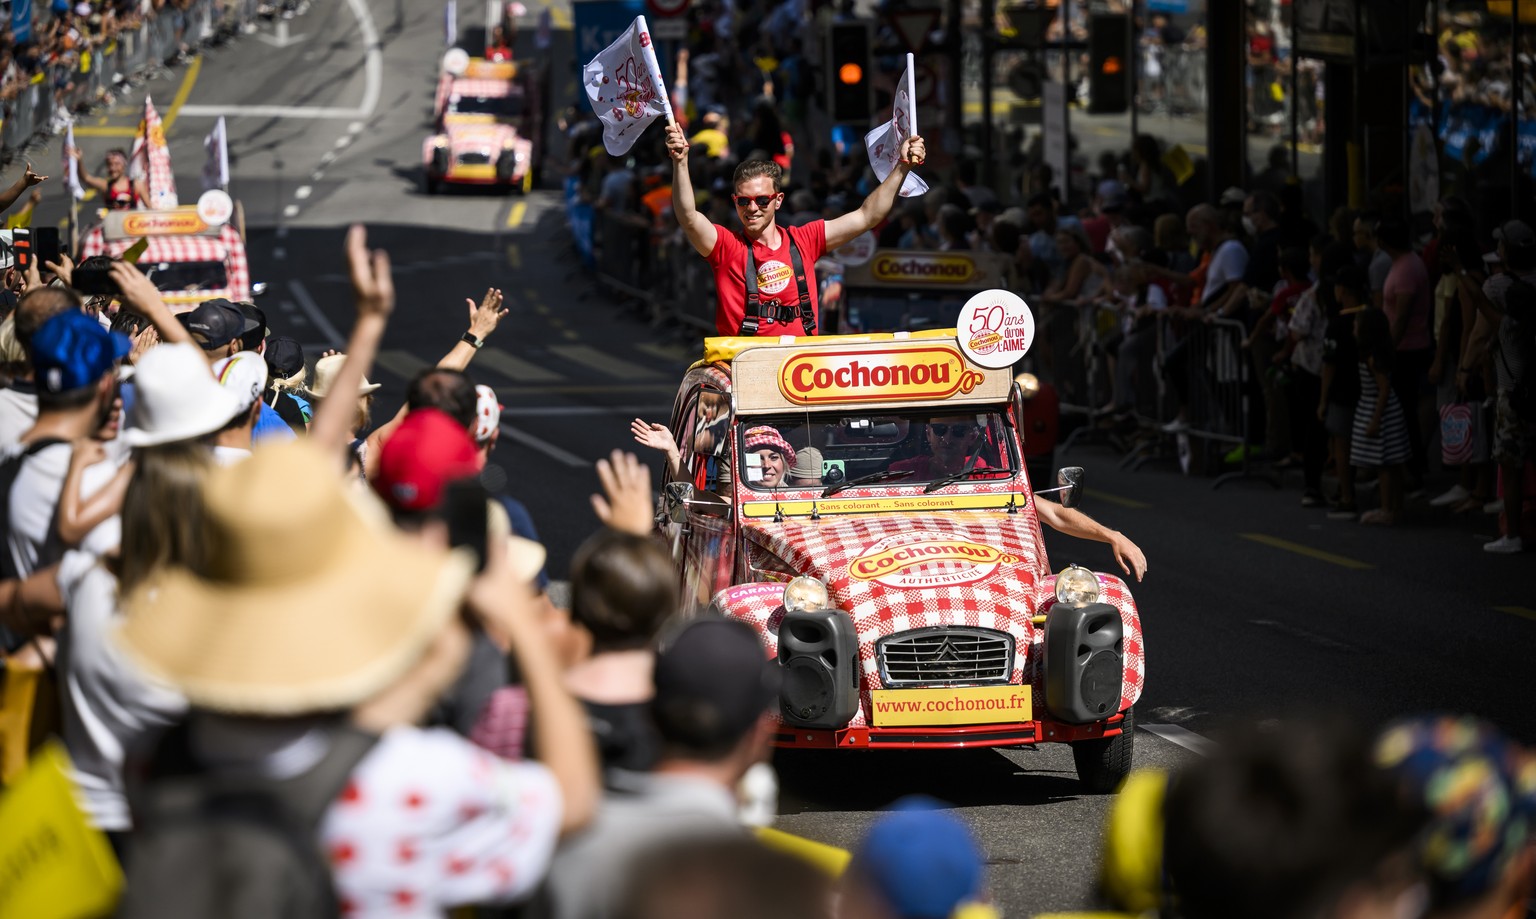 The advertising caravan is on the road during the 8th stage of the Tour de France 2022 over 186,3 km from Dole in France to Lausanne in Switzerland, in Lausanne, Switzerland, Saturday, July 9, 2022. ( ...